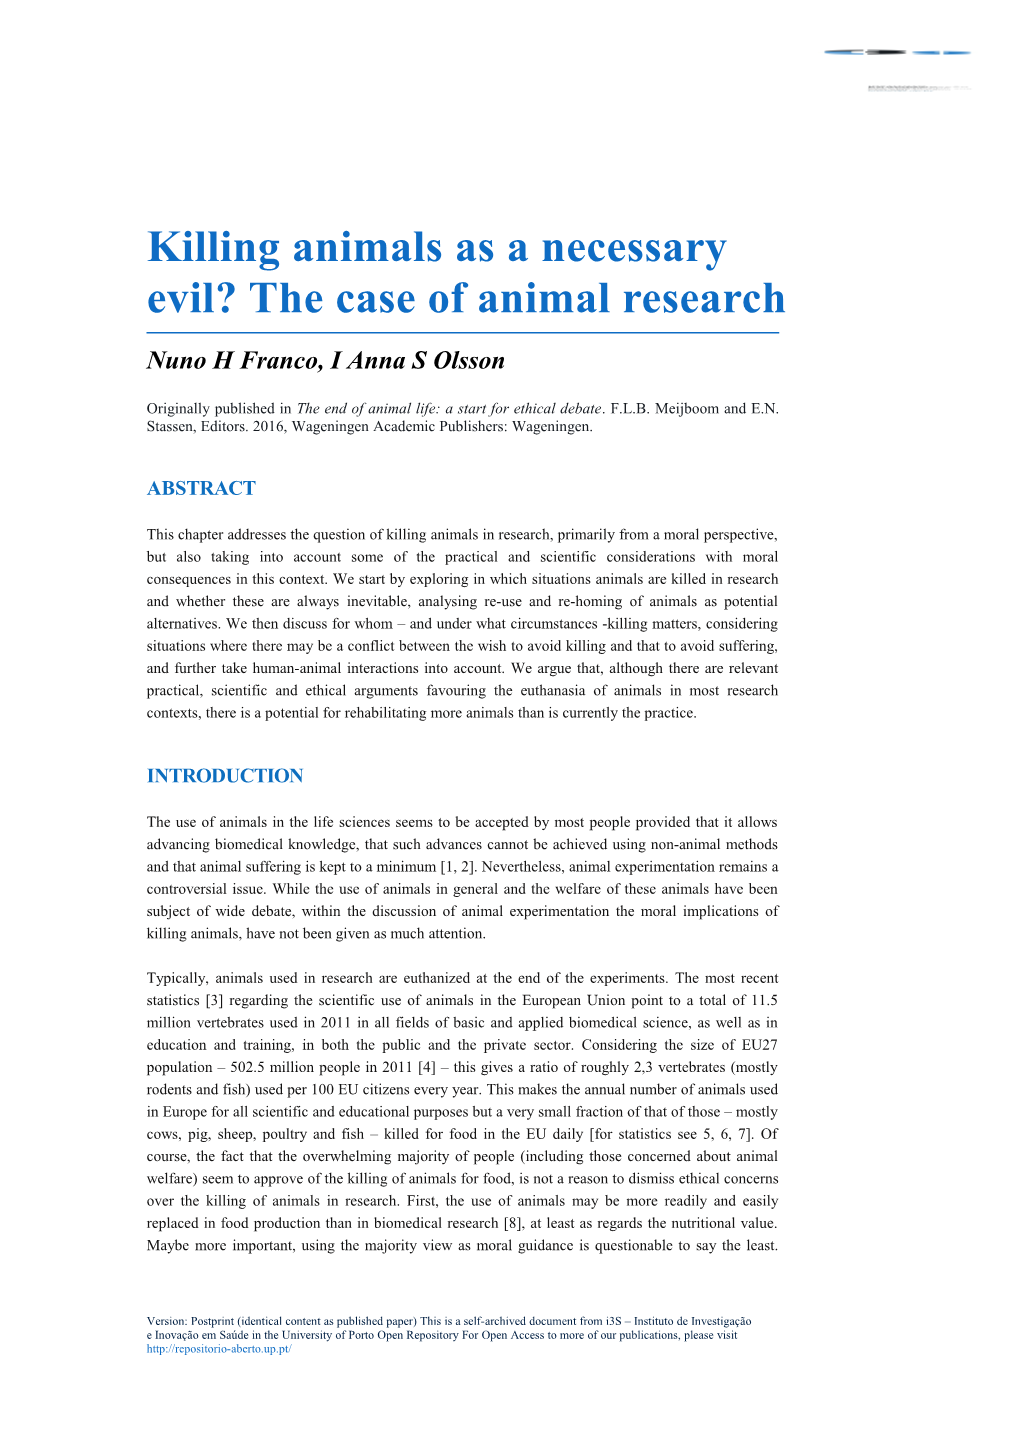 Killing Animals As a Necessary Evil? the Case of Animal Research